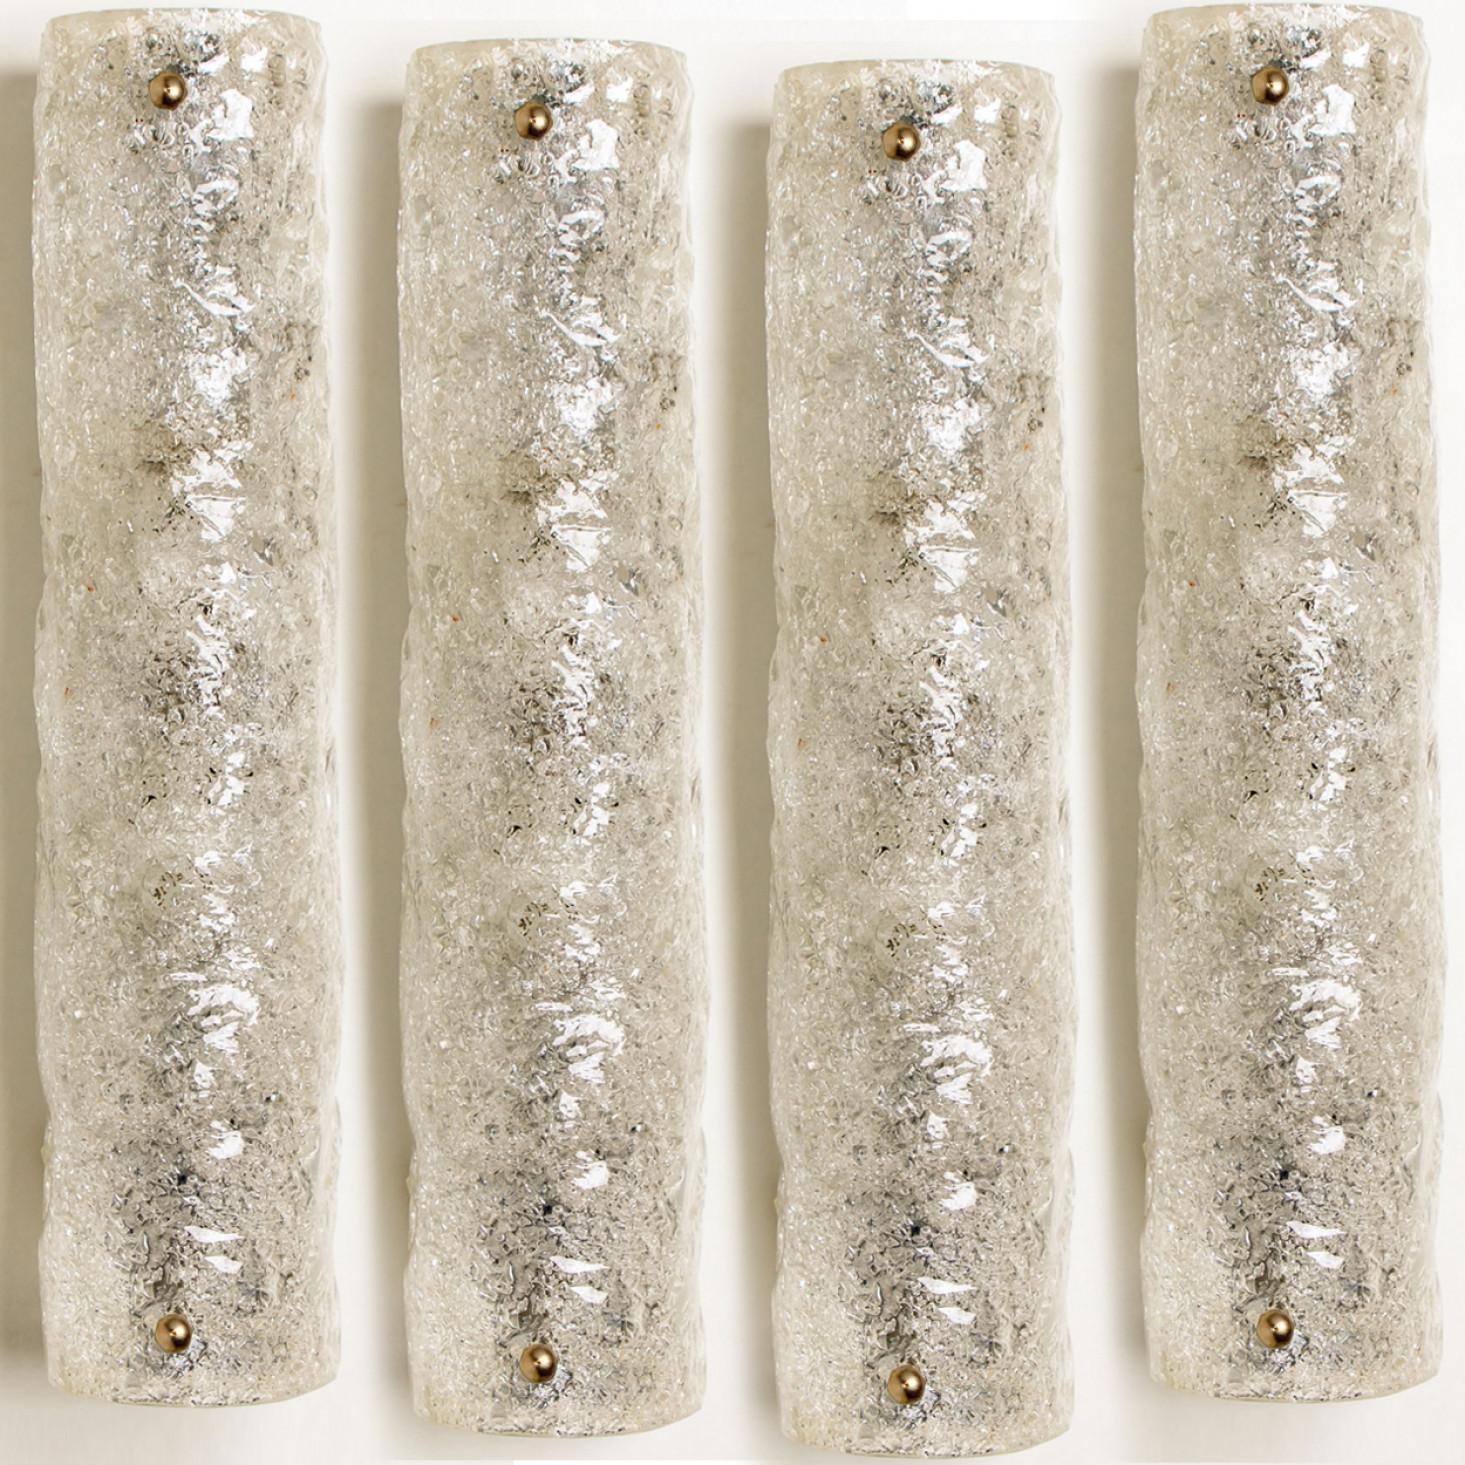 Mid-Century Modern 1 of 4 Ice Glass Wall Light Fixtures by Hillebrand, Germany, 1960s For Sale